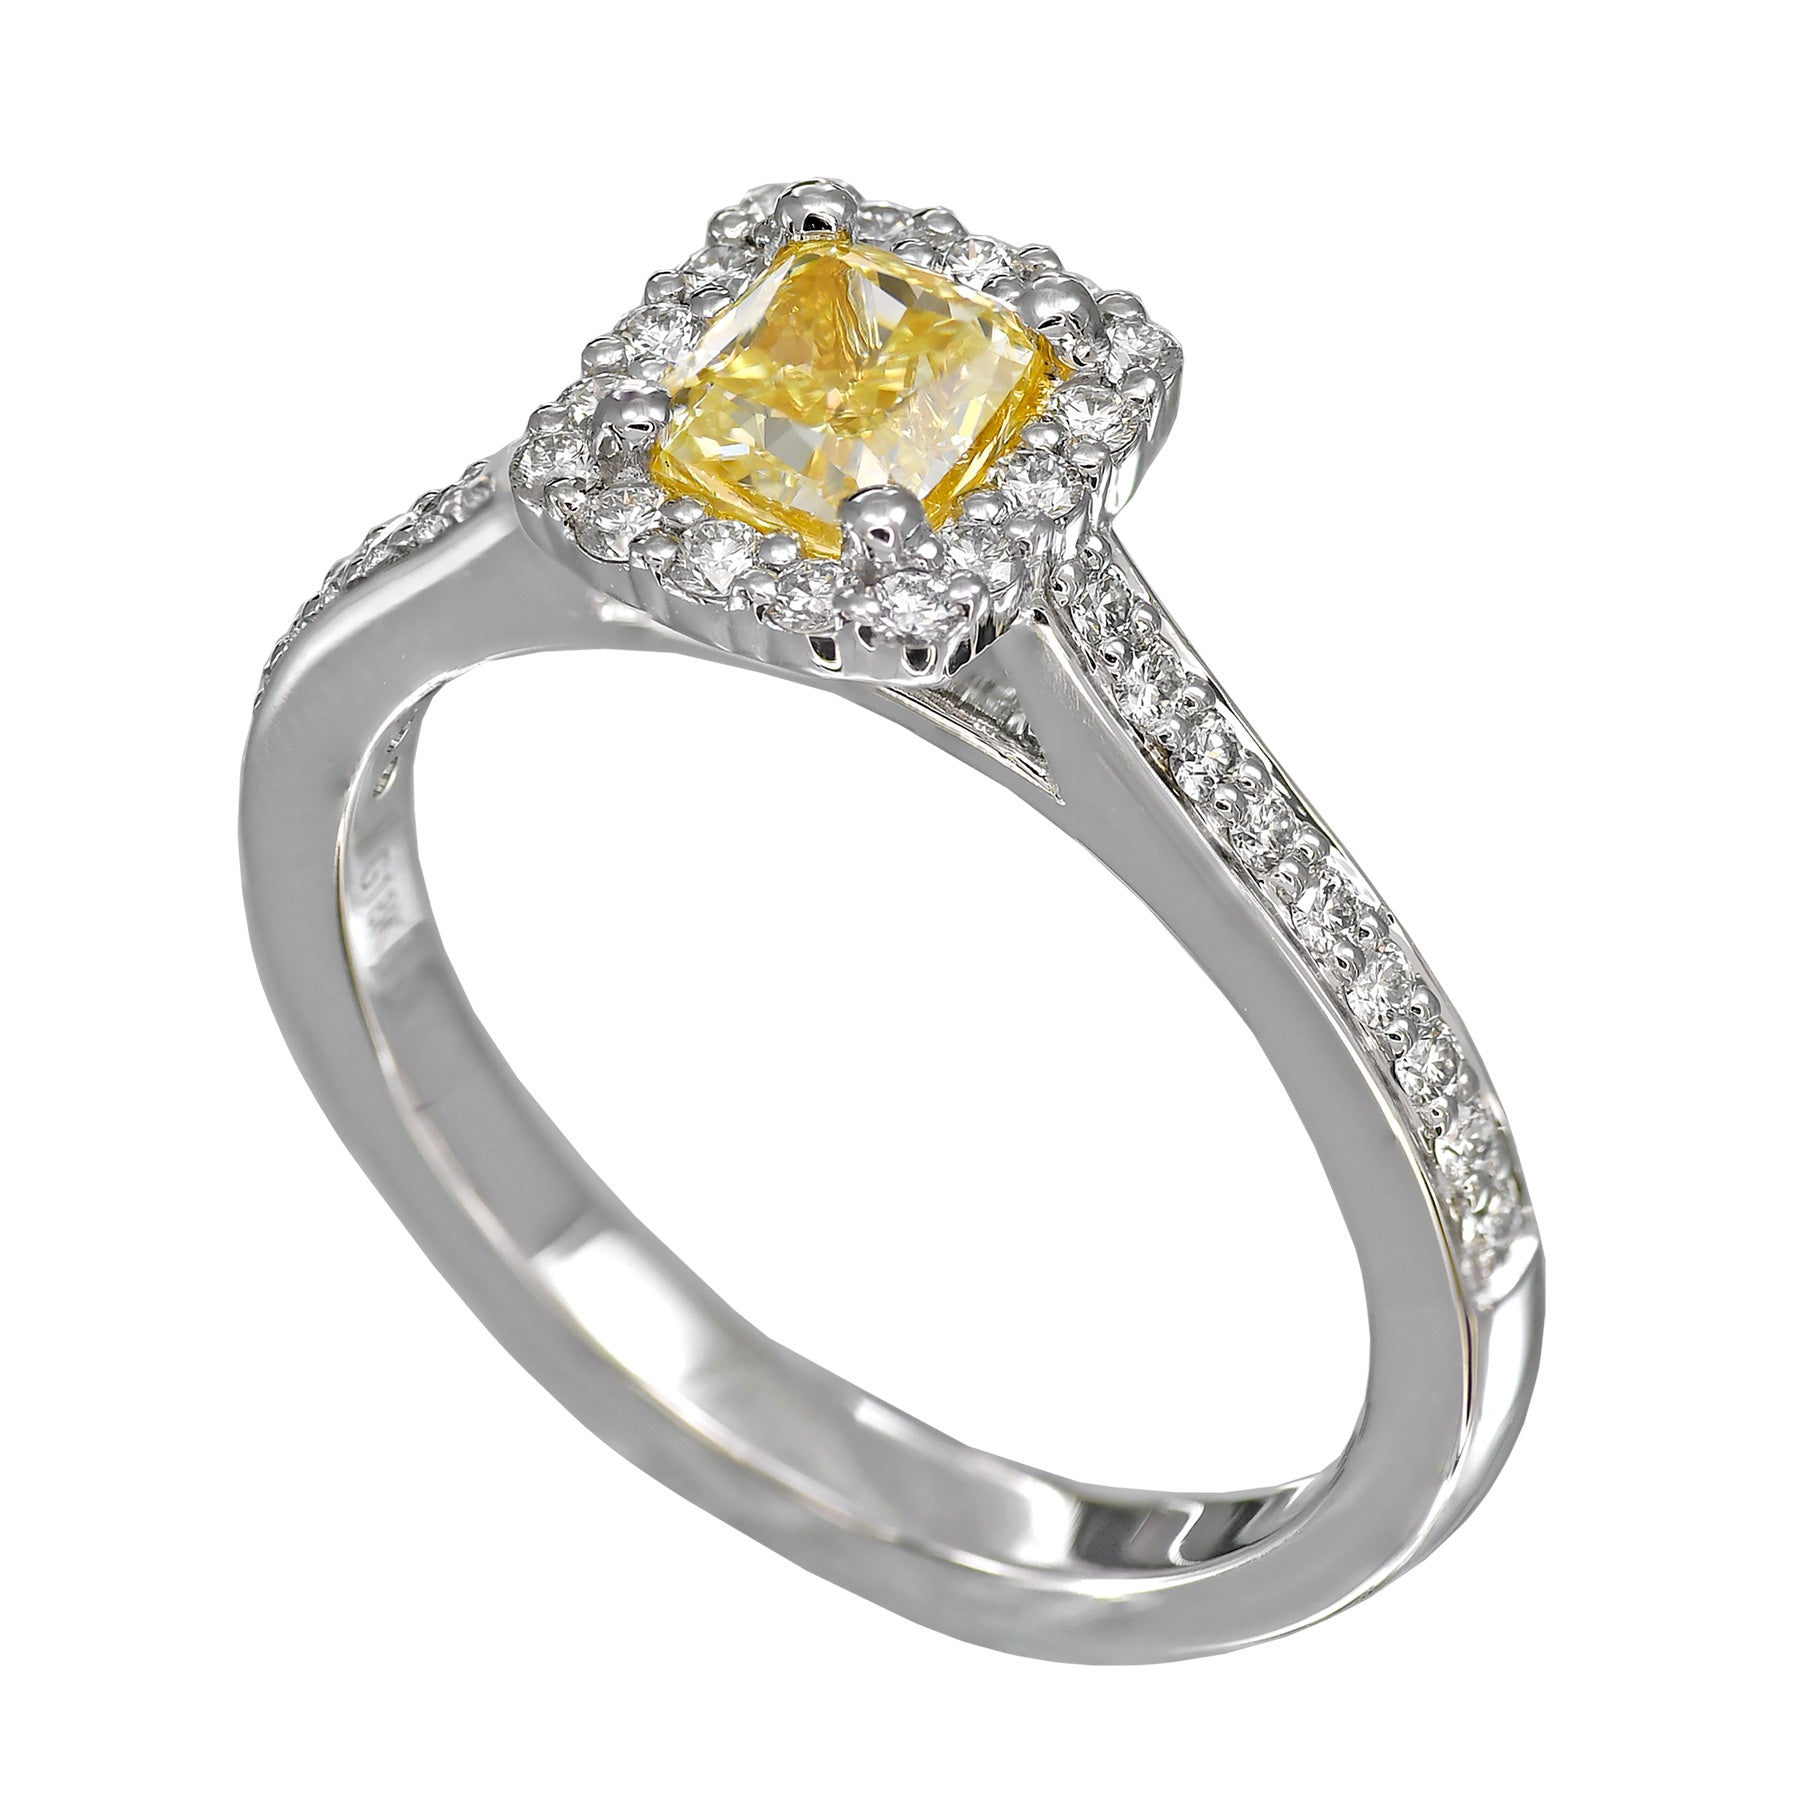 Fancy Yellow Diamond Gold Ring on a white background